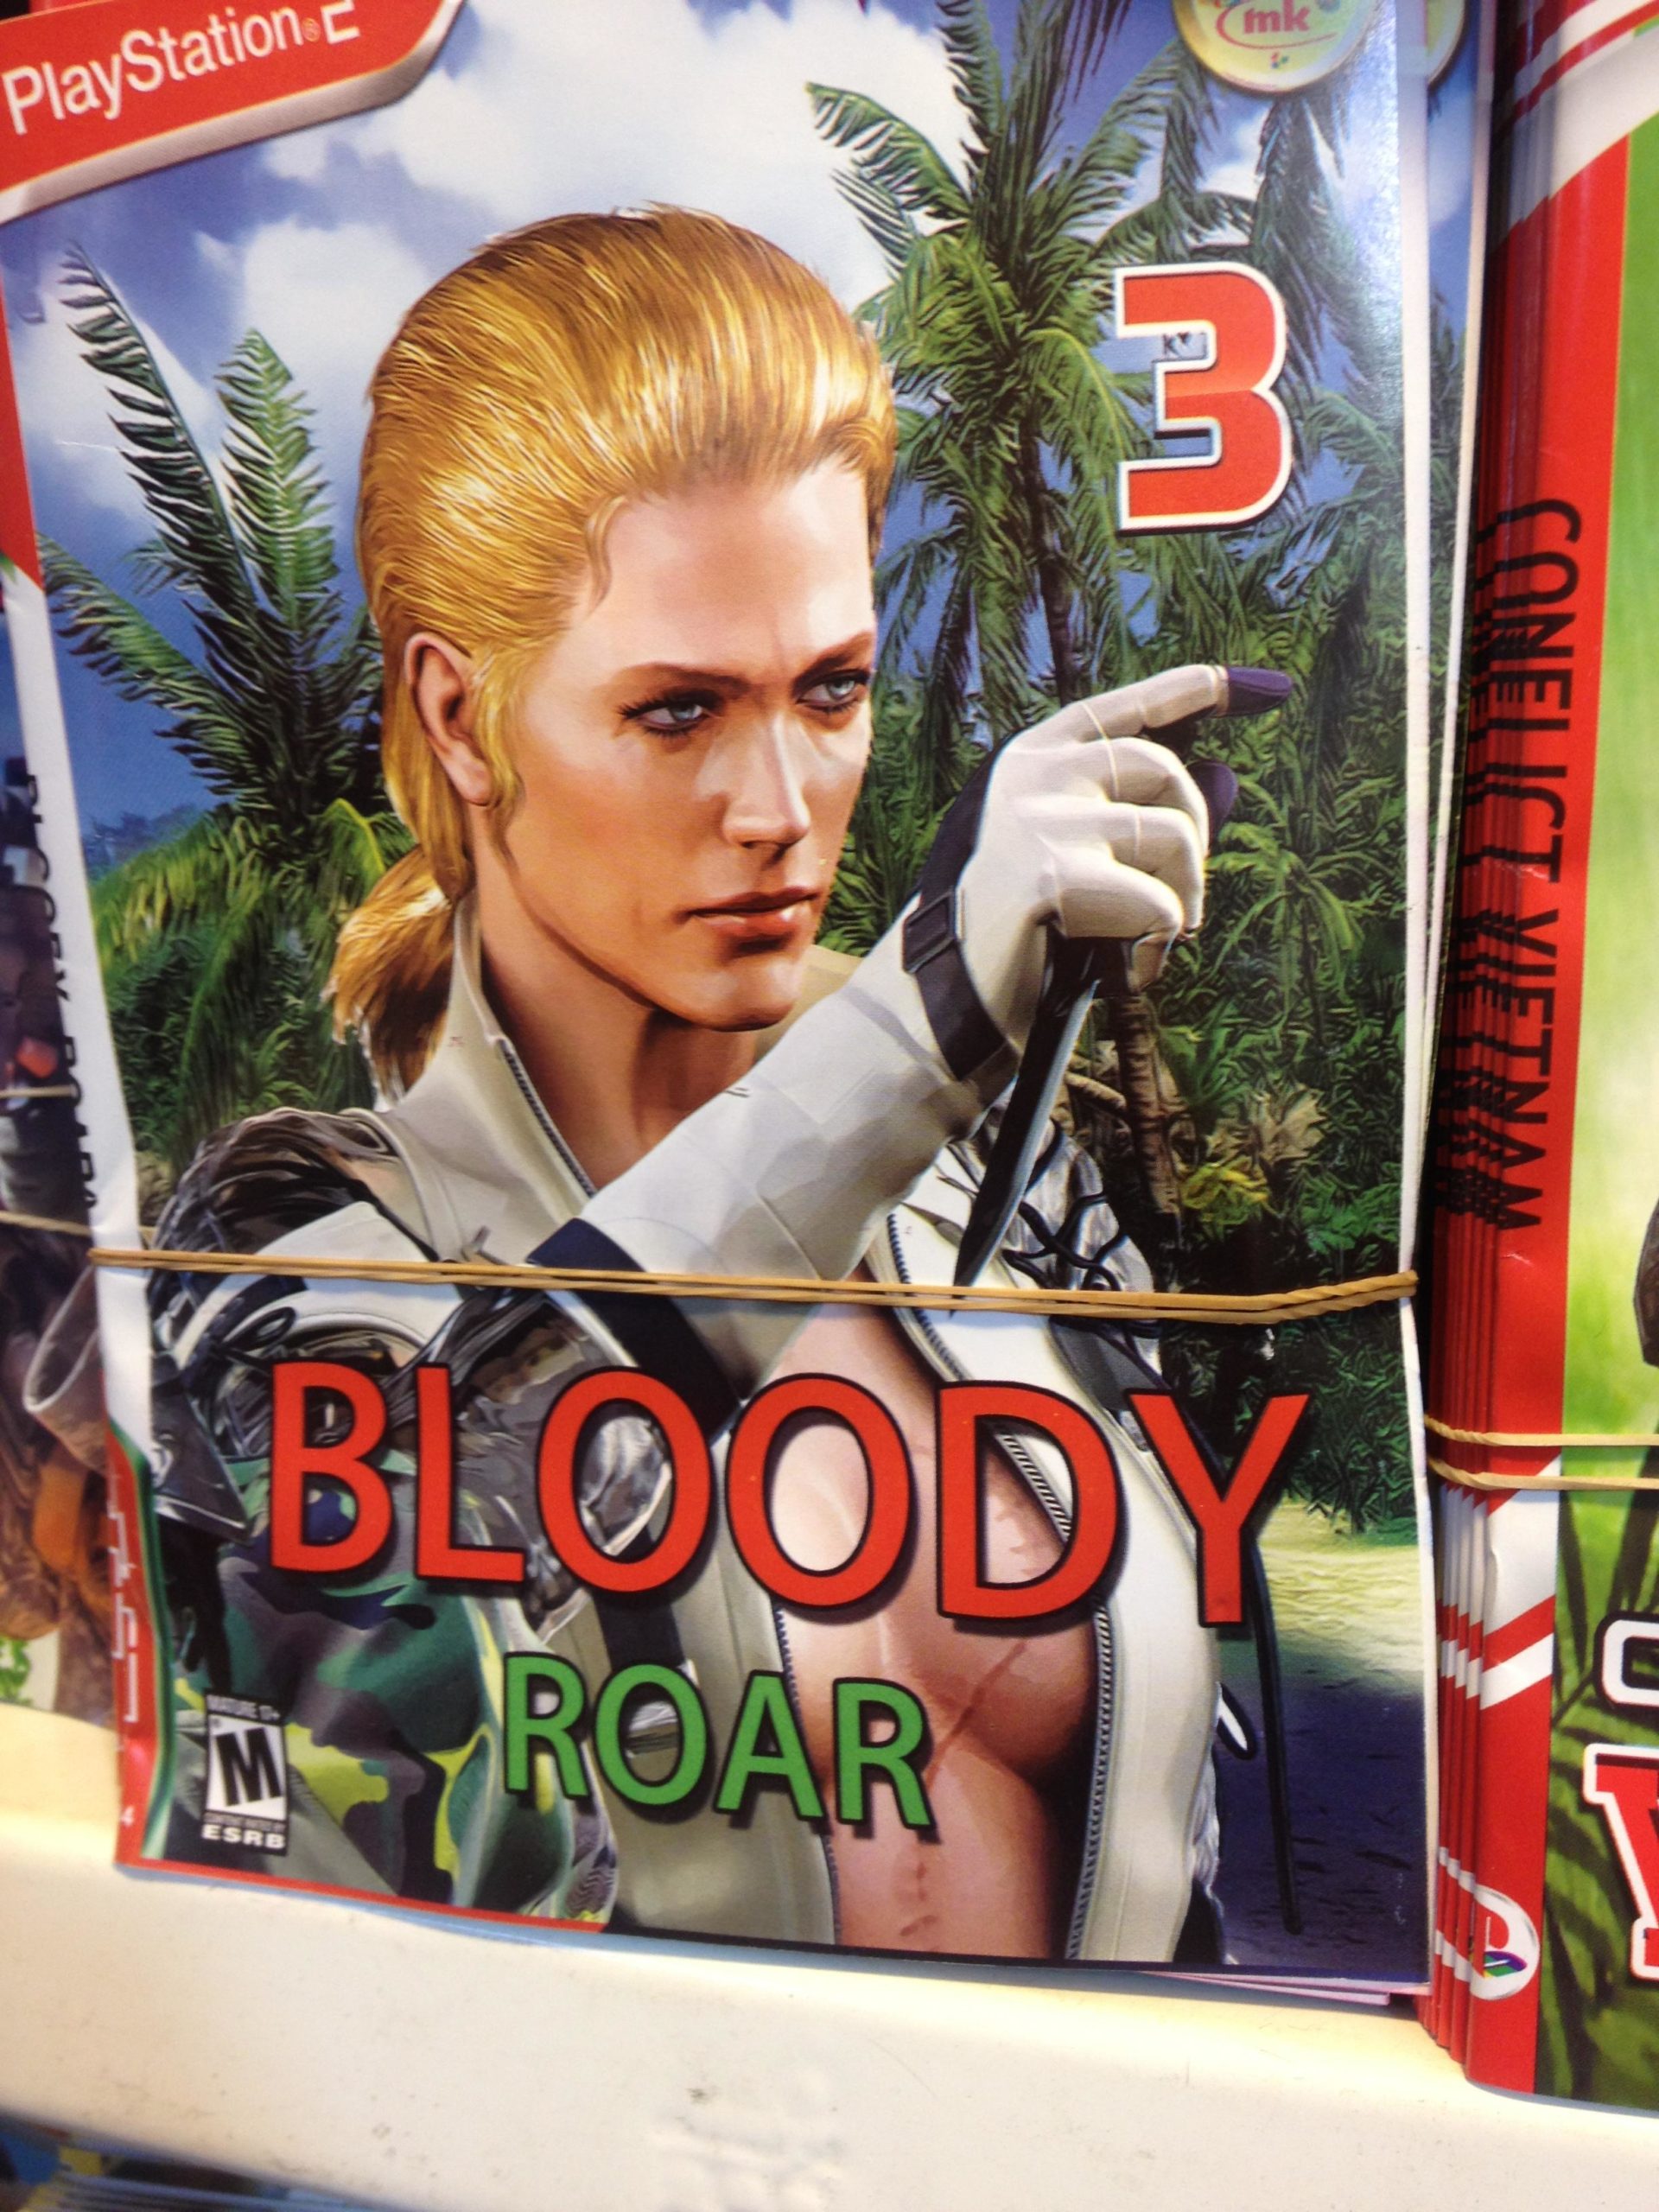 Iraqi Bootleg Game Covers Are The Best Kind Of Ridiculous